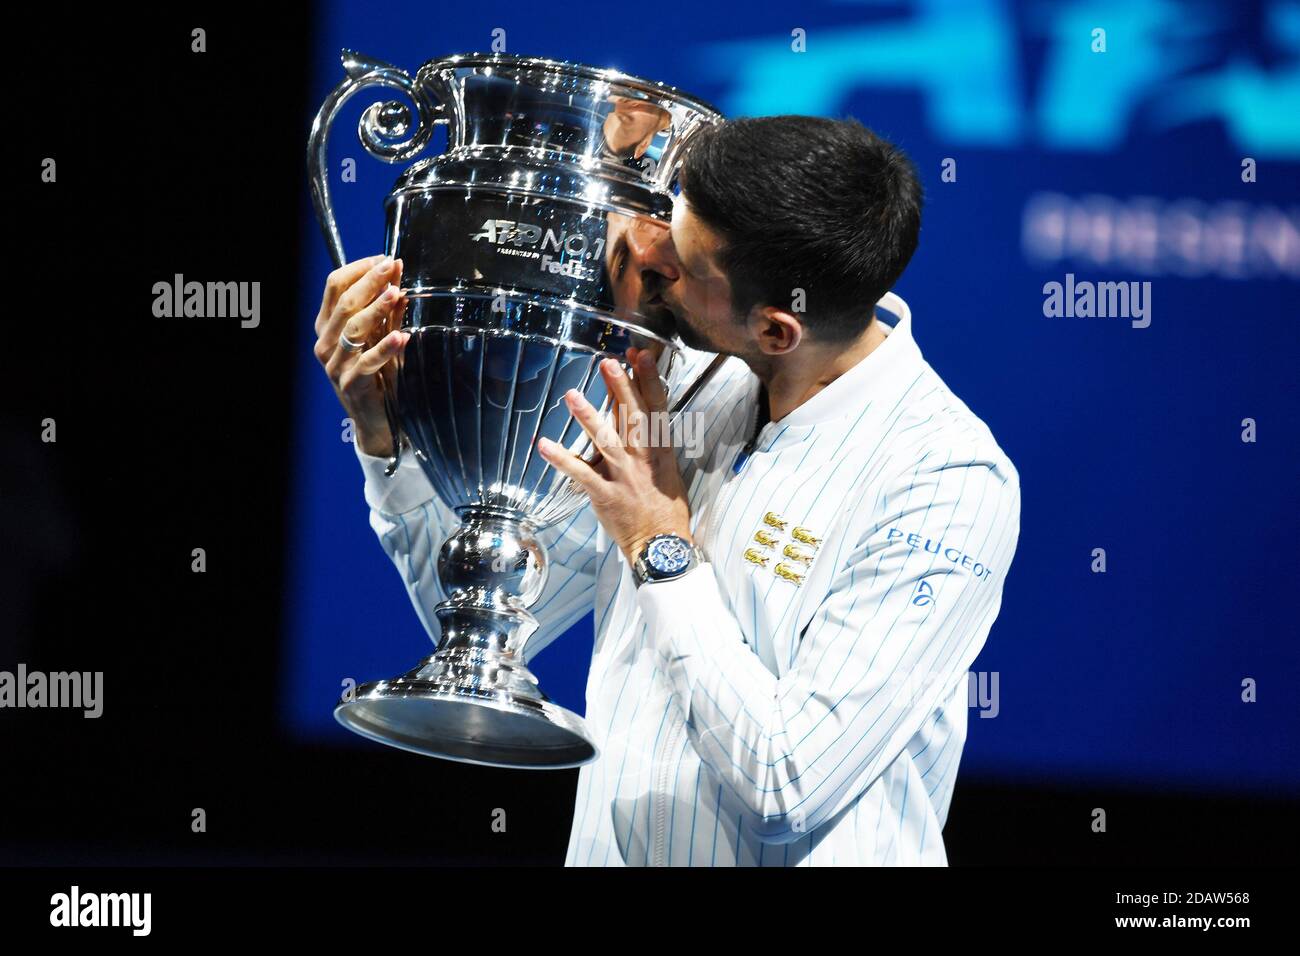 Atp world ranking board hi-res stock photography and images - Alamy